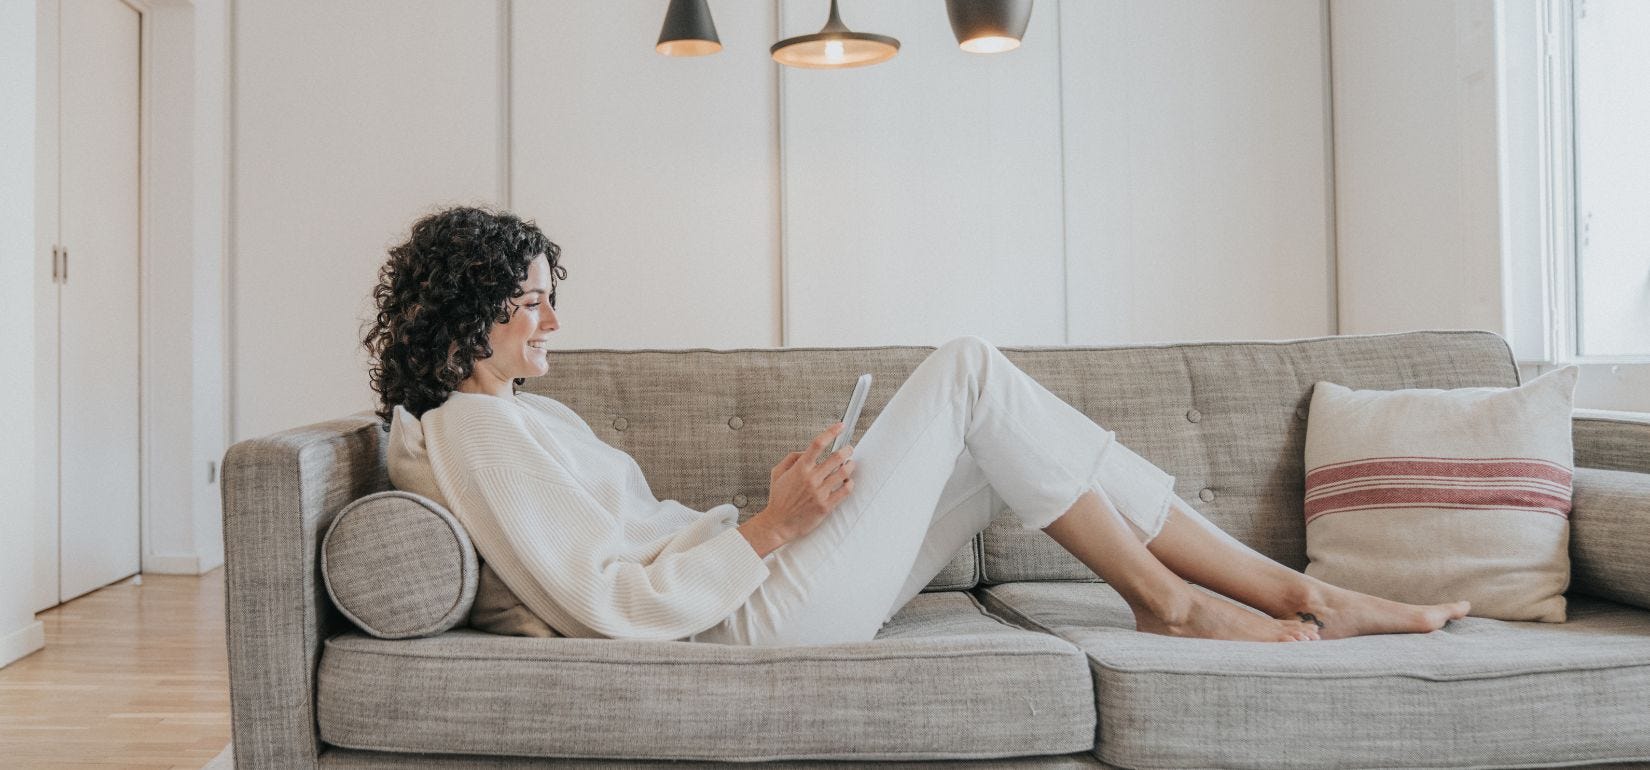 Woman sitting on couch reading